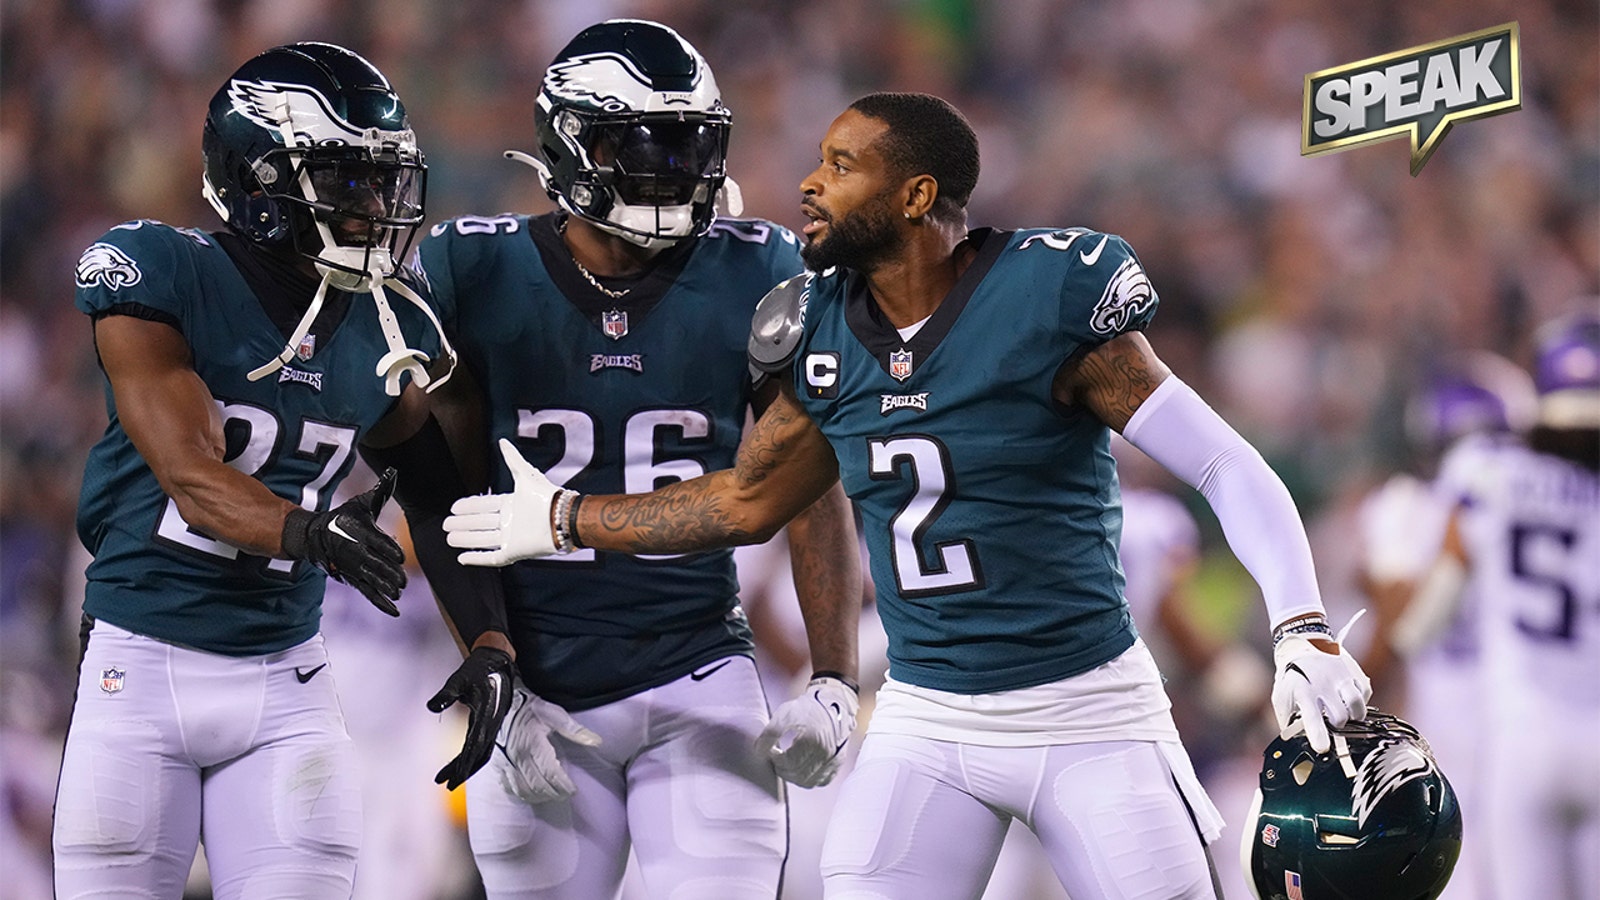 Are the Eagles the team to beat in the NFC?